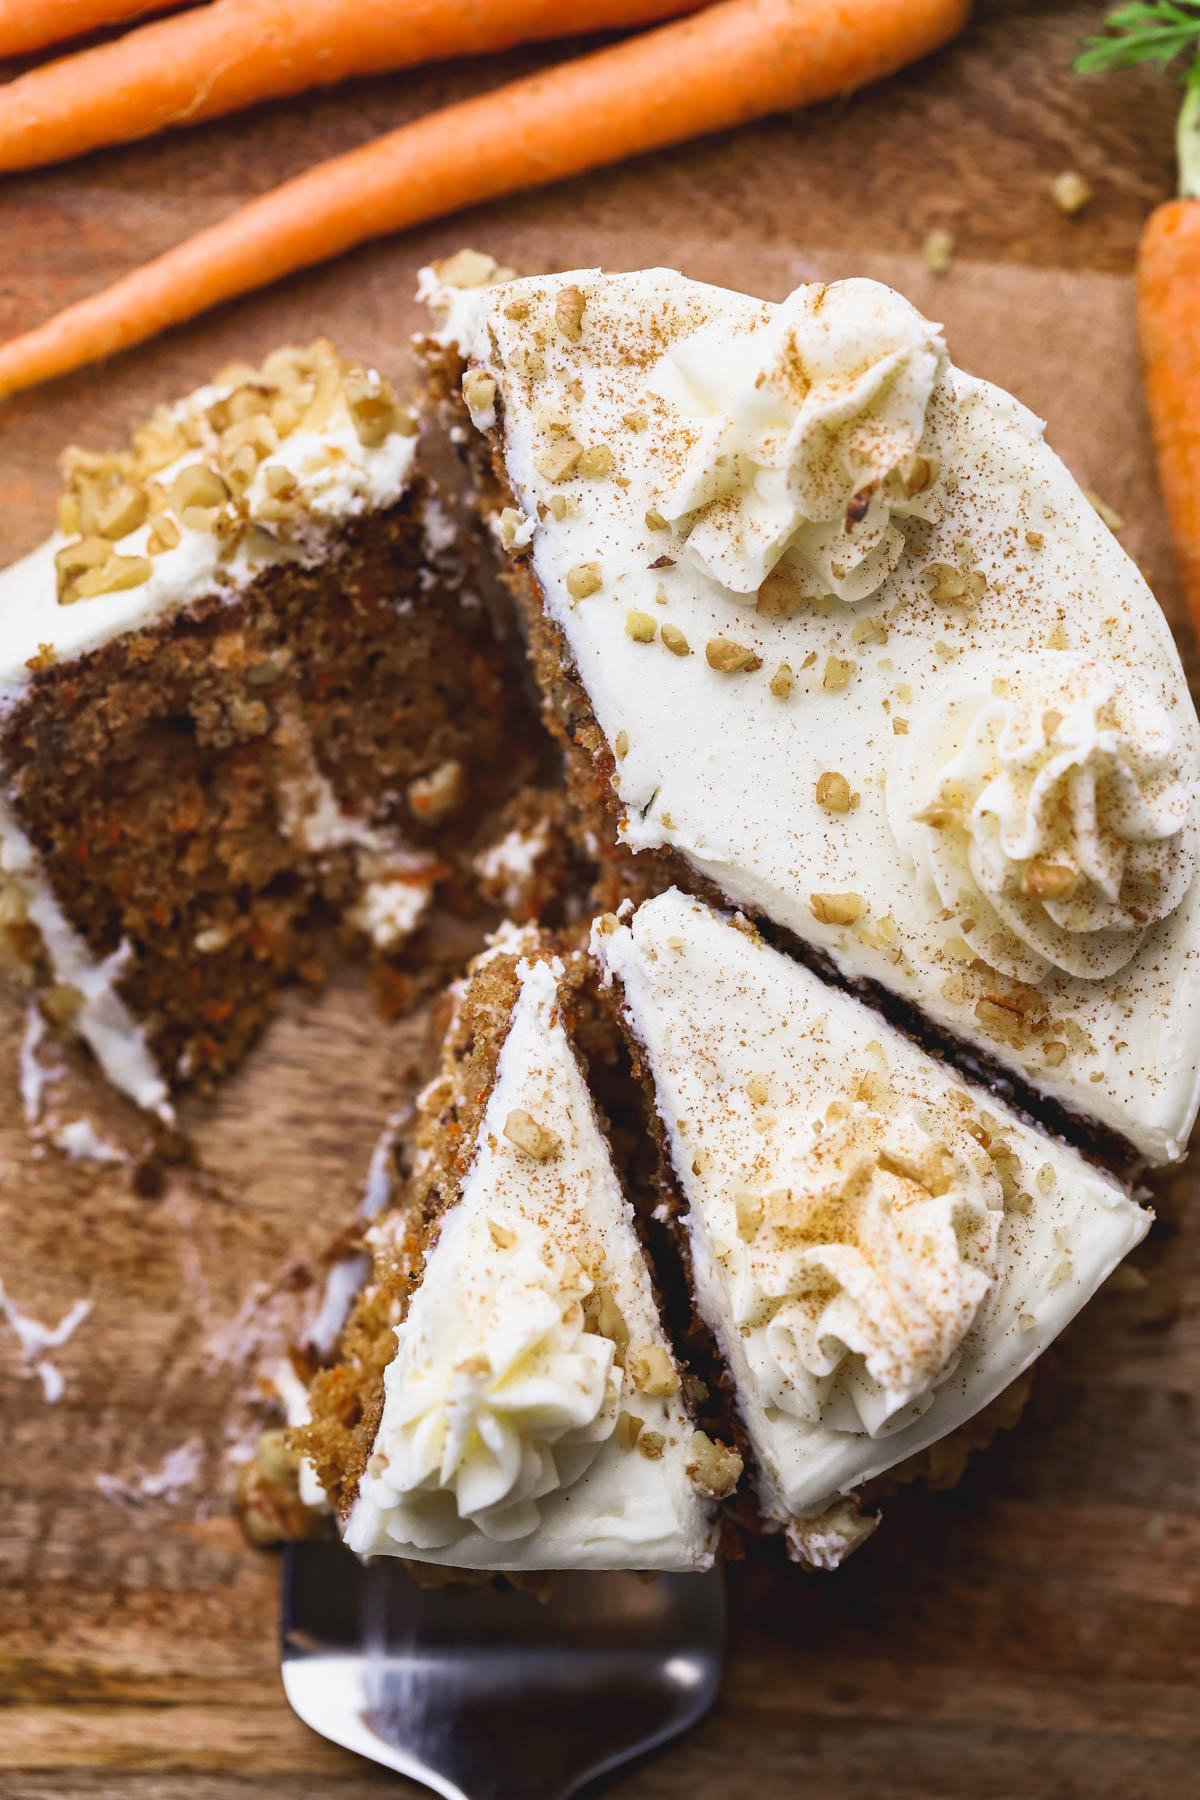 Cream cheese covered carrot cake with chopped walnuts.  